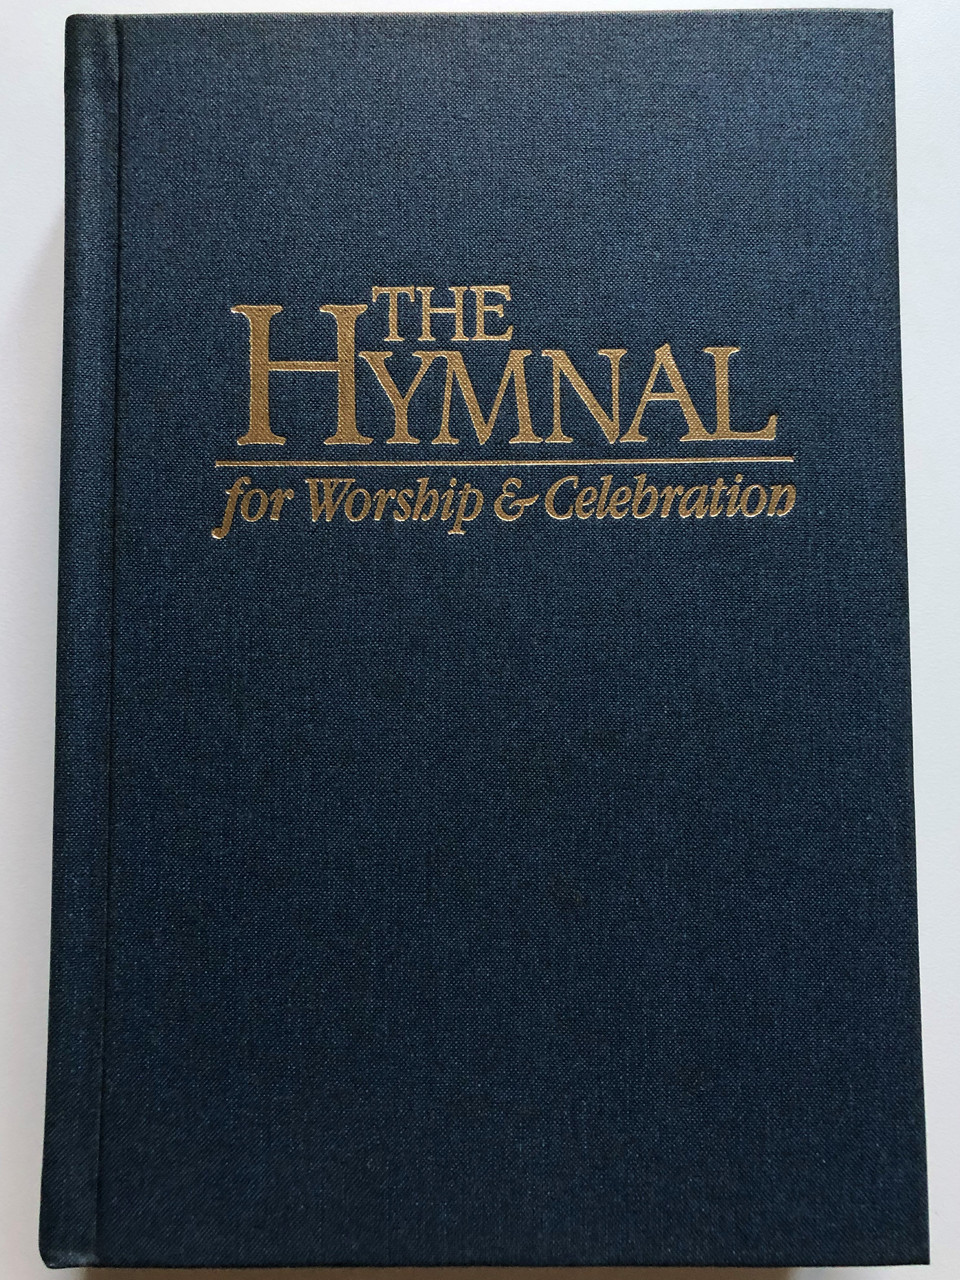 https://cdn10.bigcommerce.com/s-62bdpkt7pb/products/50442/images/257337/The_Hymnal_for_Worship_Celebration_1__88908.1667226437.1280.1280.JPG?c=2